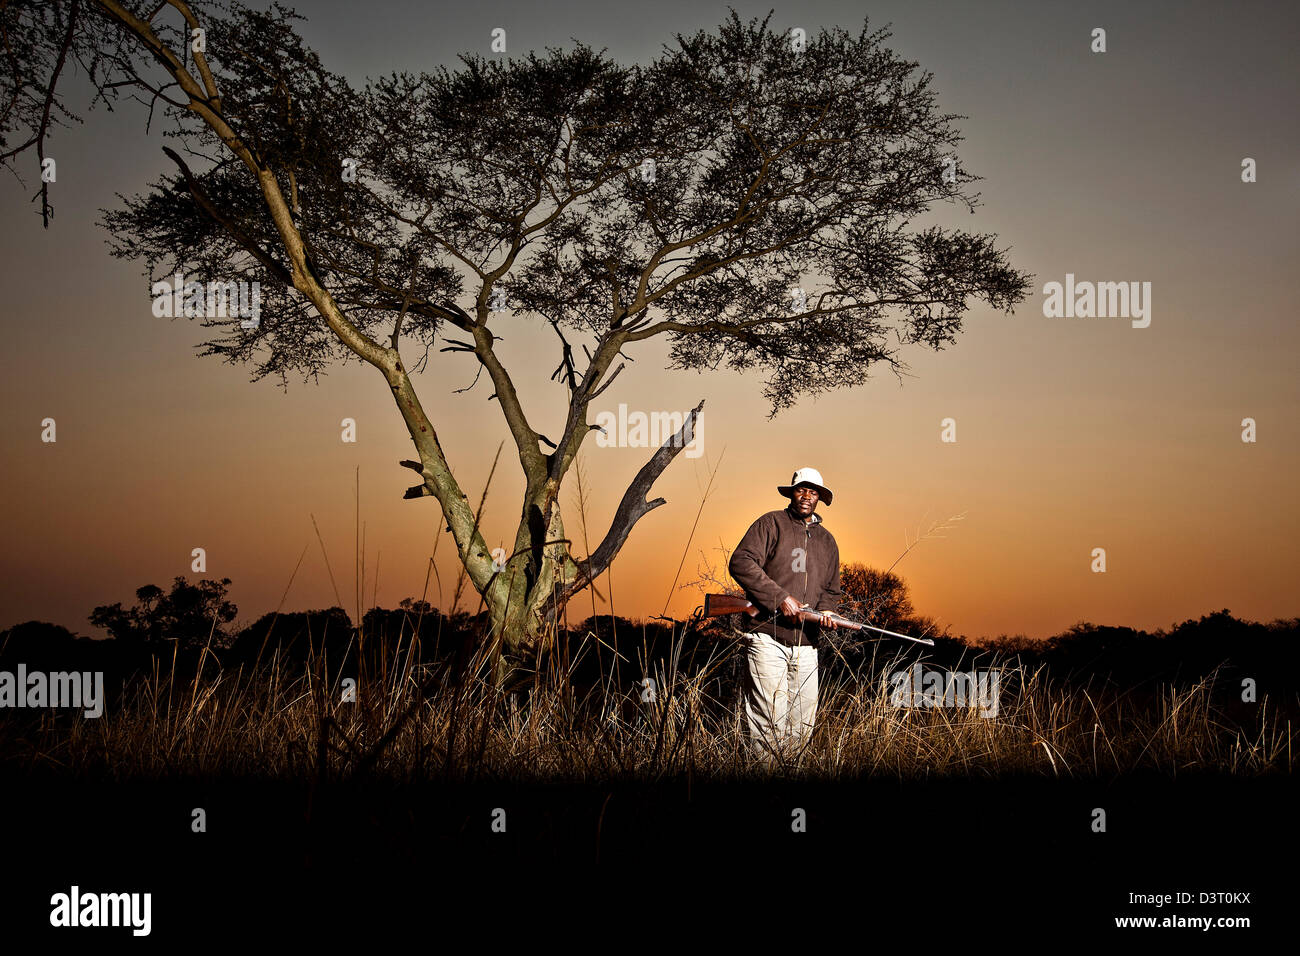 Safari ranger stands with rifle in Phinda Game Reserve, South Africa Stock Photo